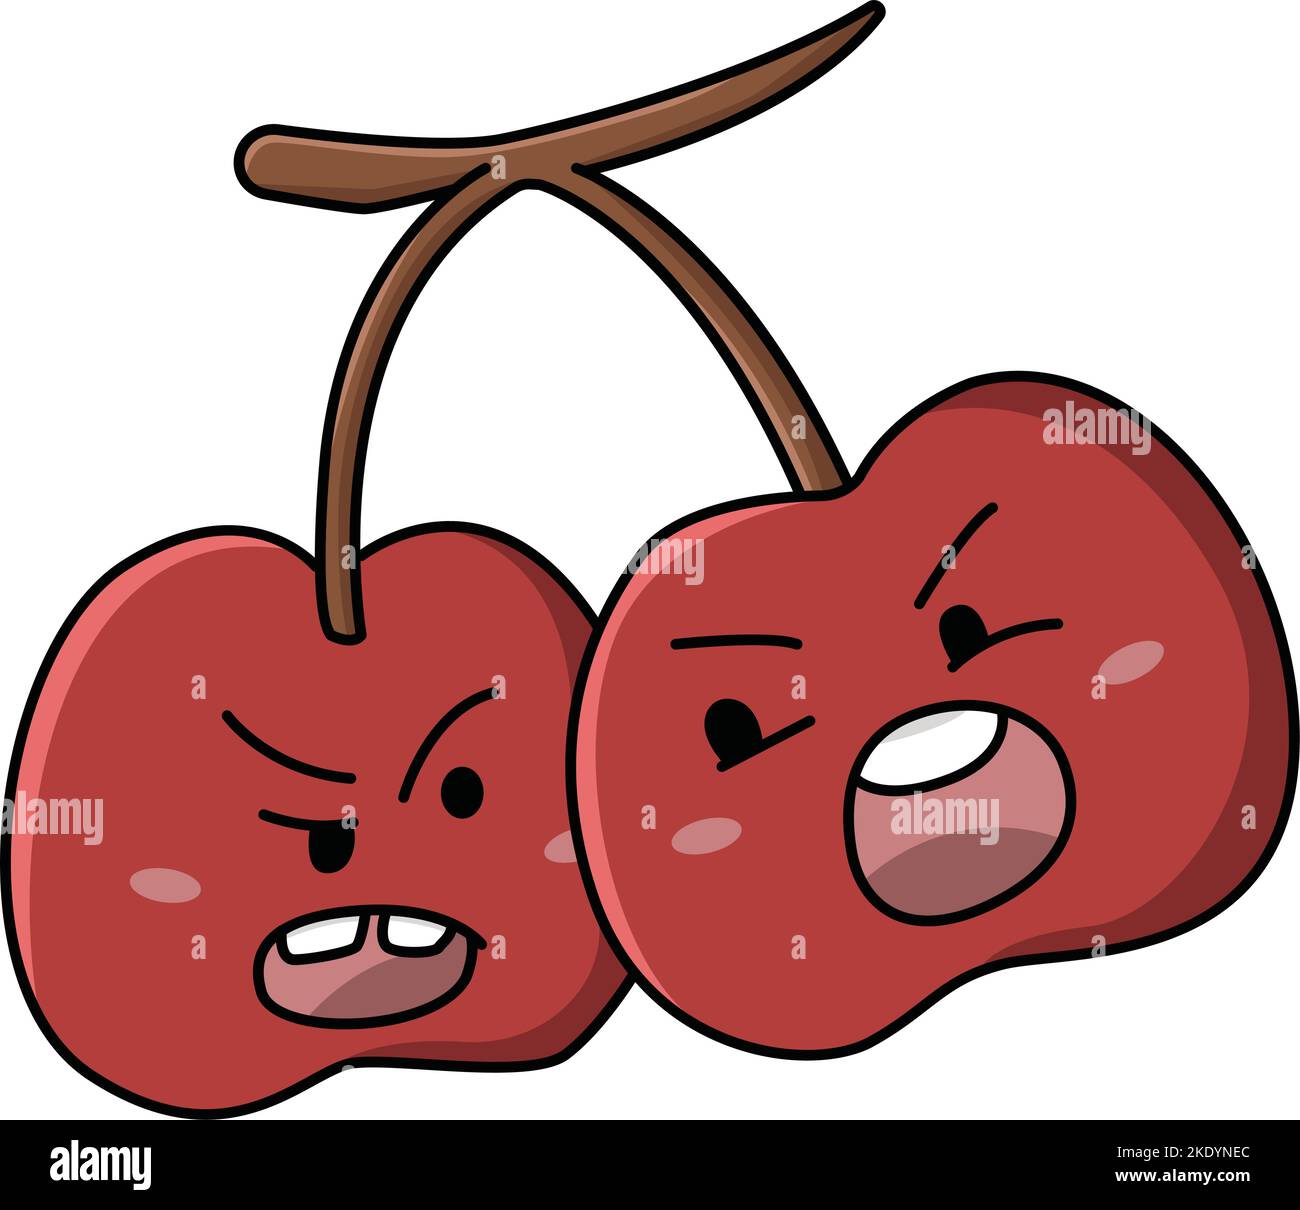 A kawaii cherry with angry daces over a white background Stock Vector